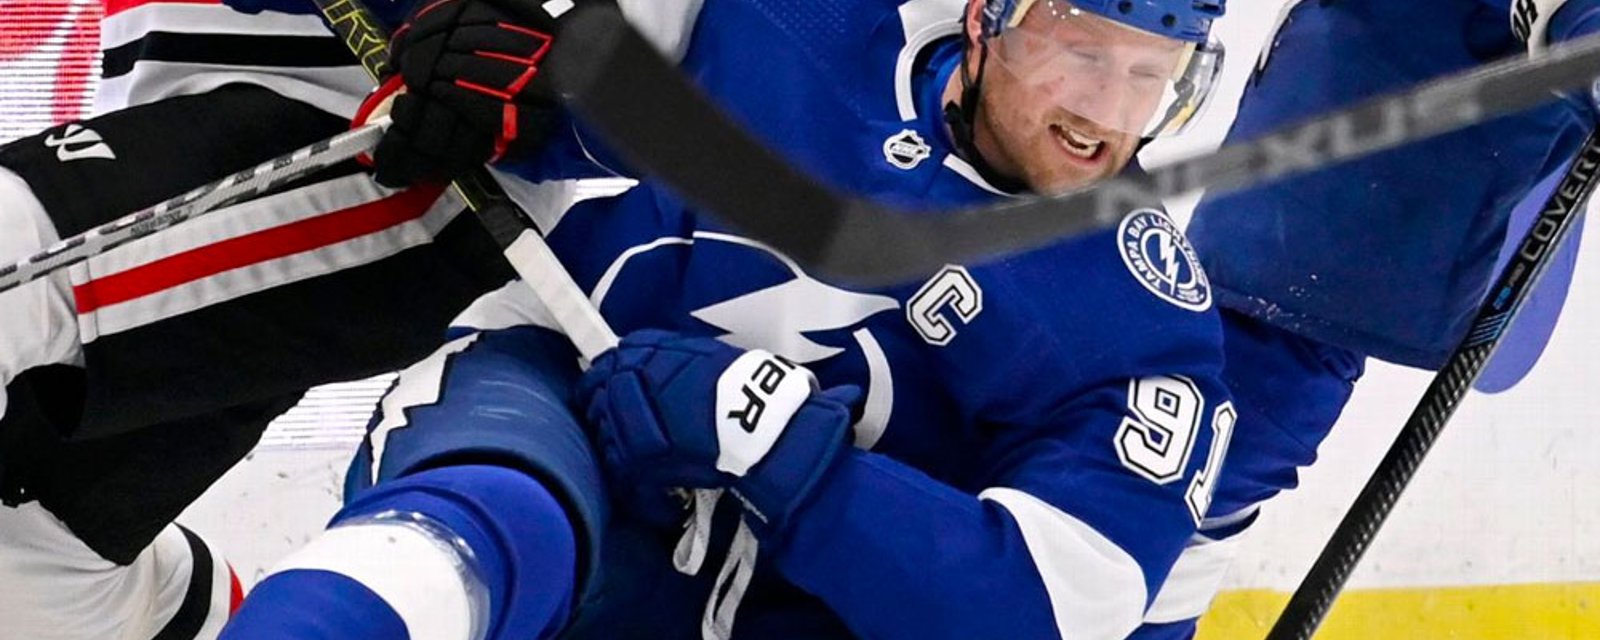 Steven Stamkos pulled from lineup moments before puck drop